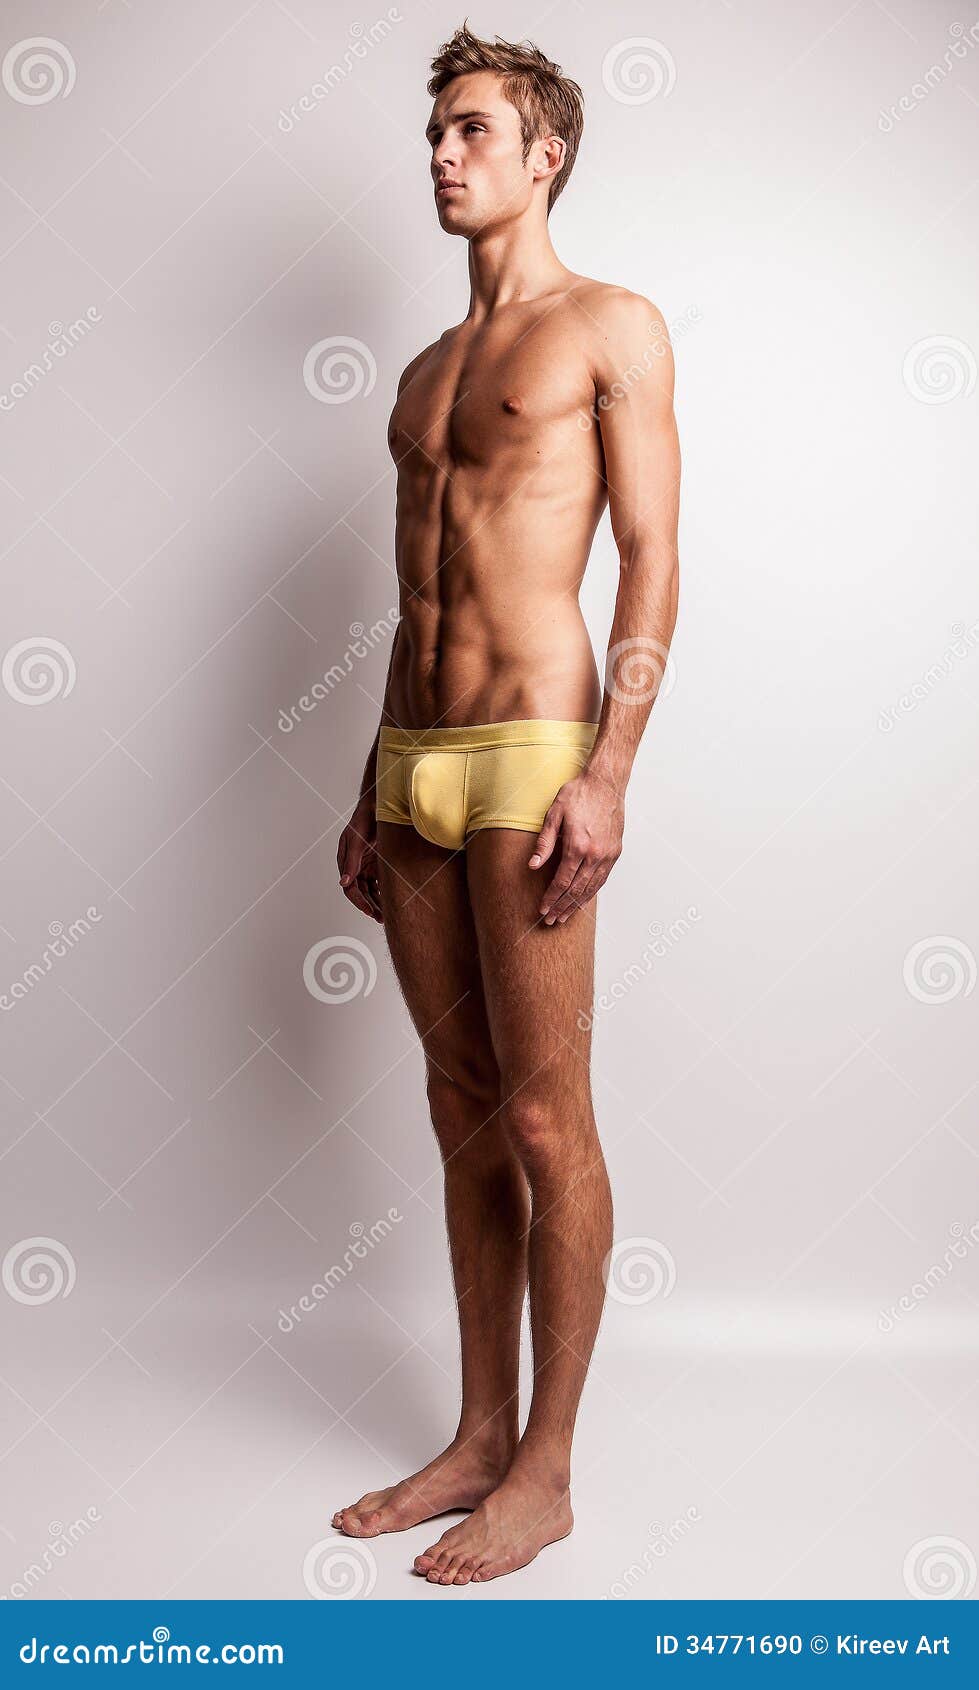 Attractive Young Undressed Man Model pic